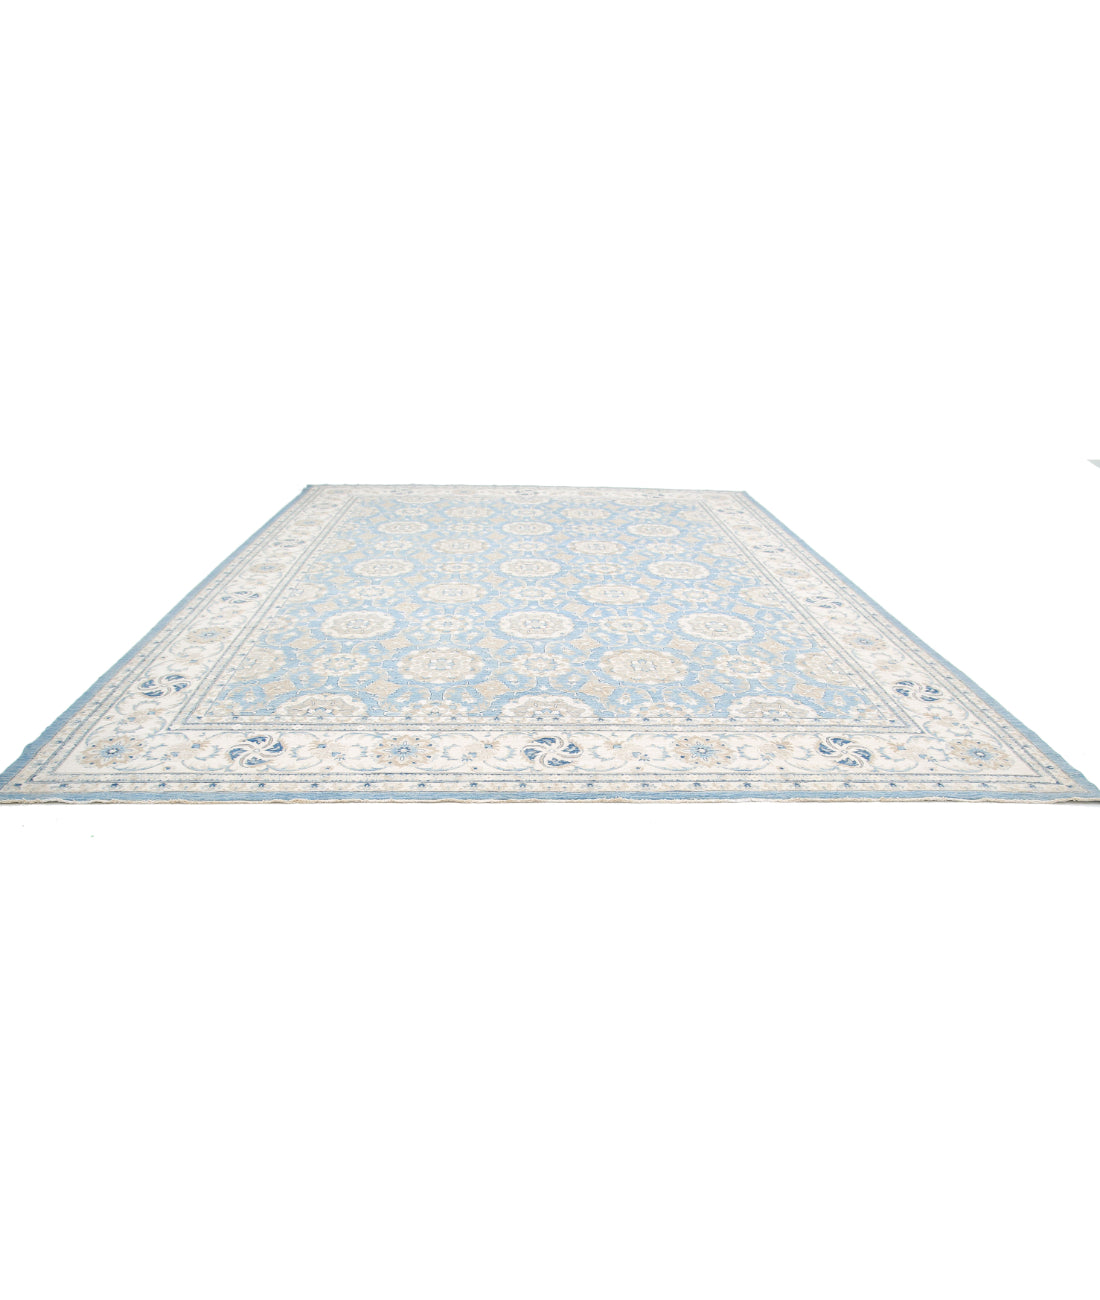 Serenity 13'2'' X 16'10'' Hand-Knotted Wool Rug 13'2'' x 16'10'' (395 X 505) / Blue / Ivory